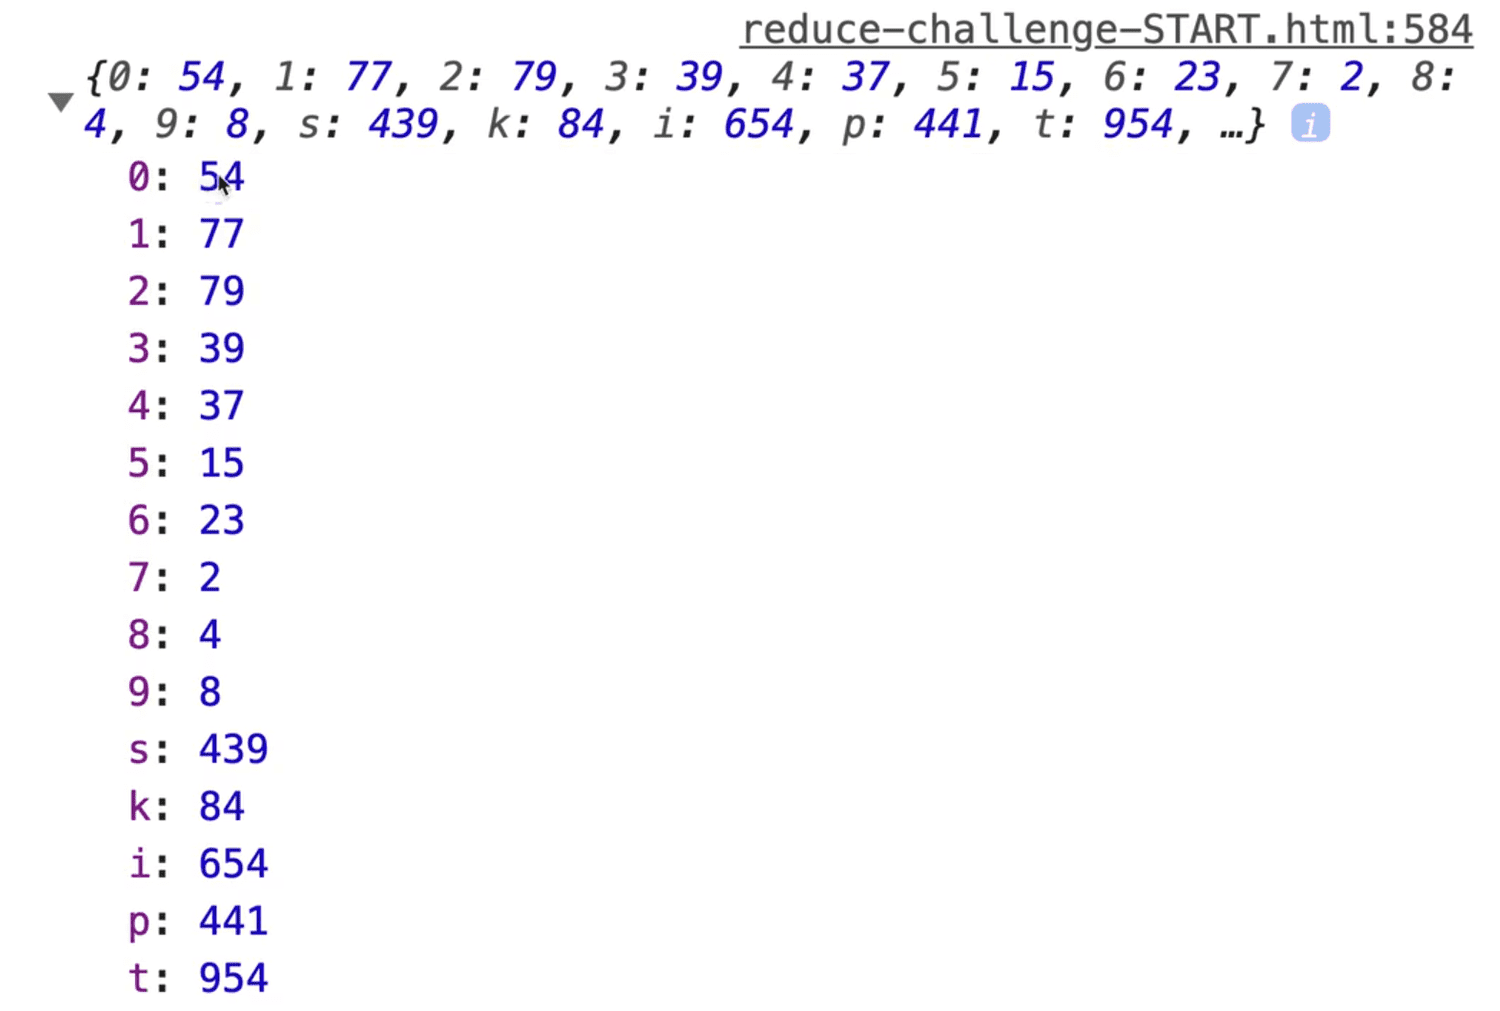 result of occurrence of each character in array